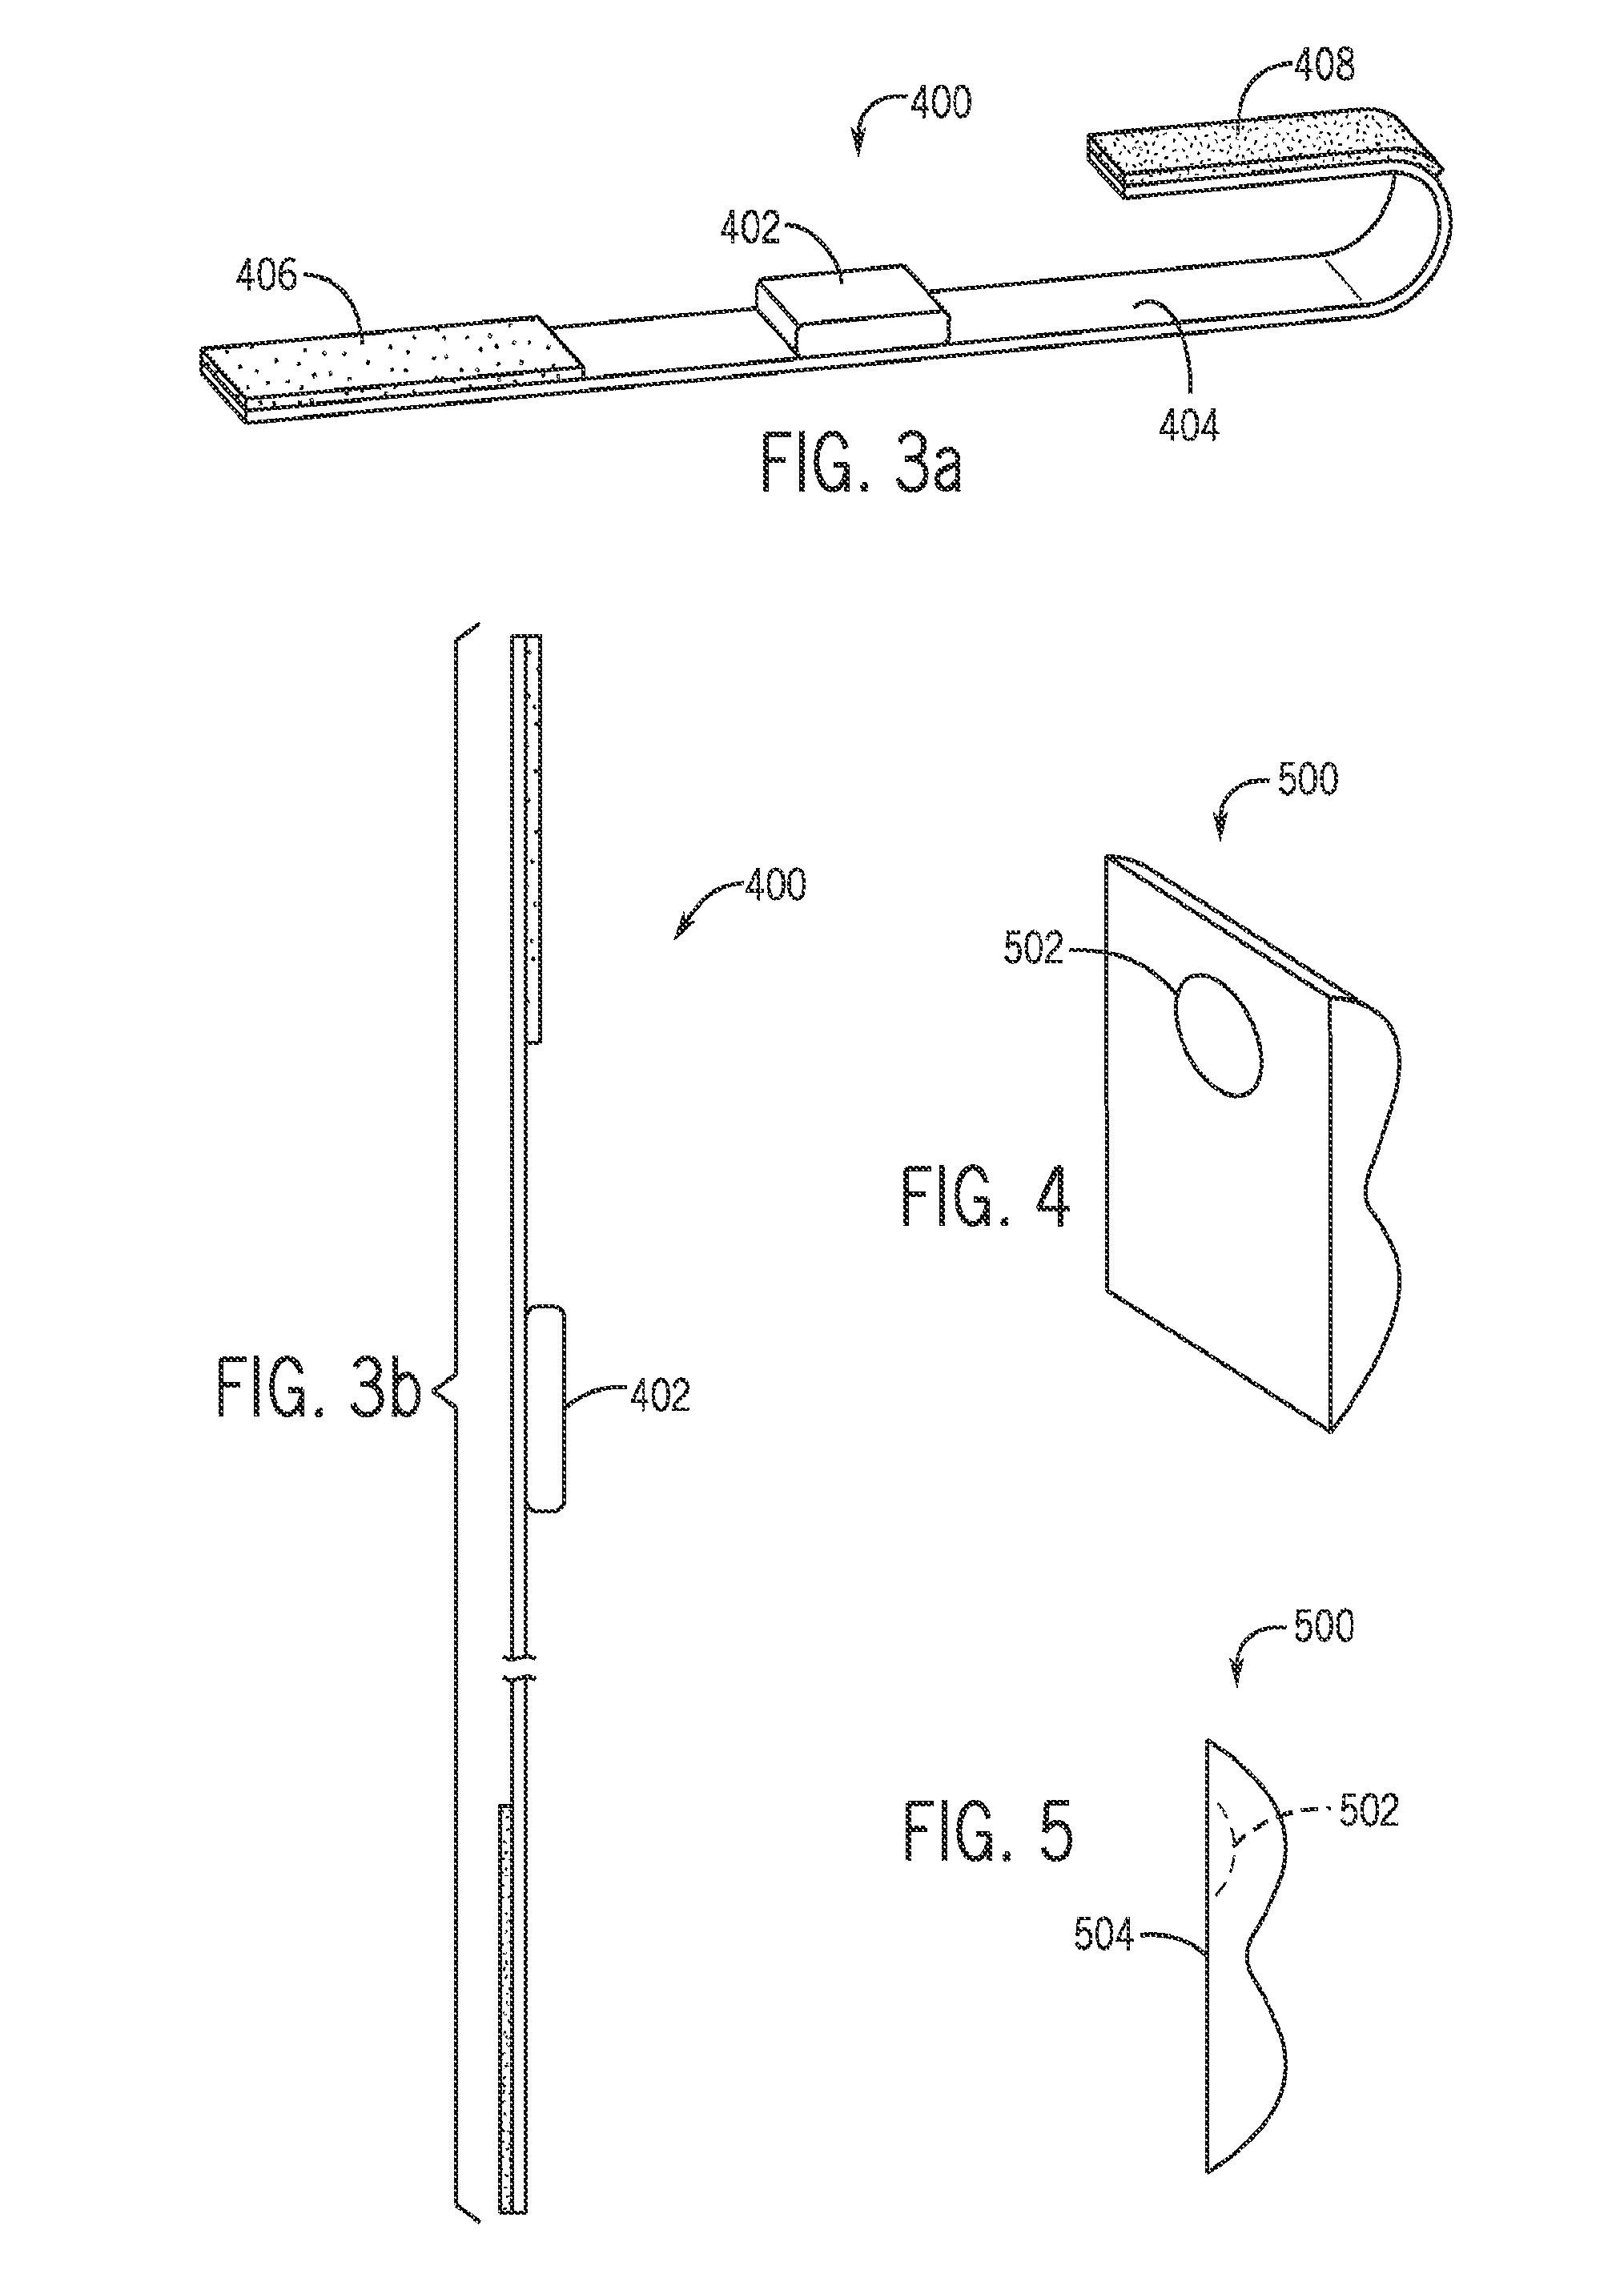 Compression device and pressure sensor for treatment of abnormal upper esophageal sphincter functionality